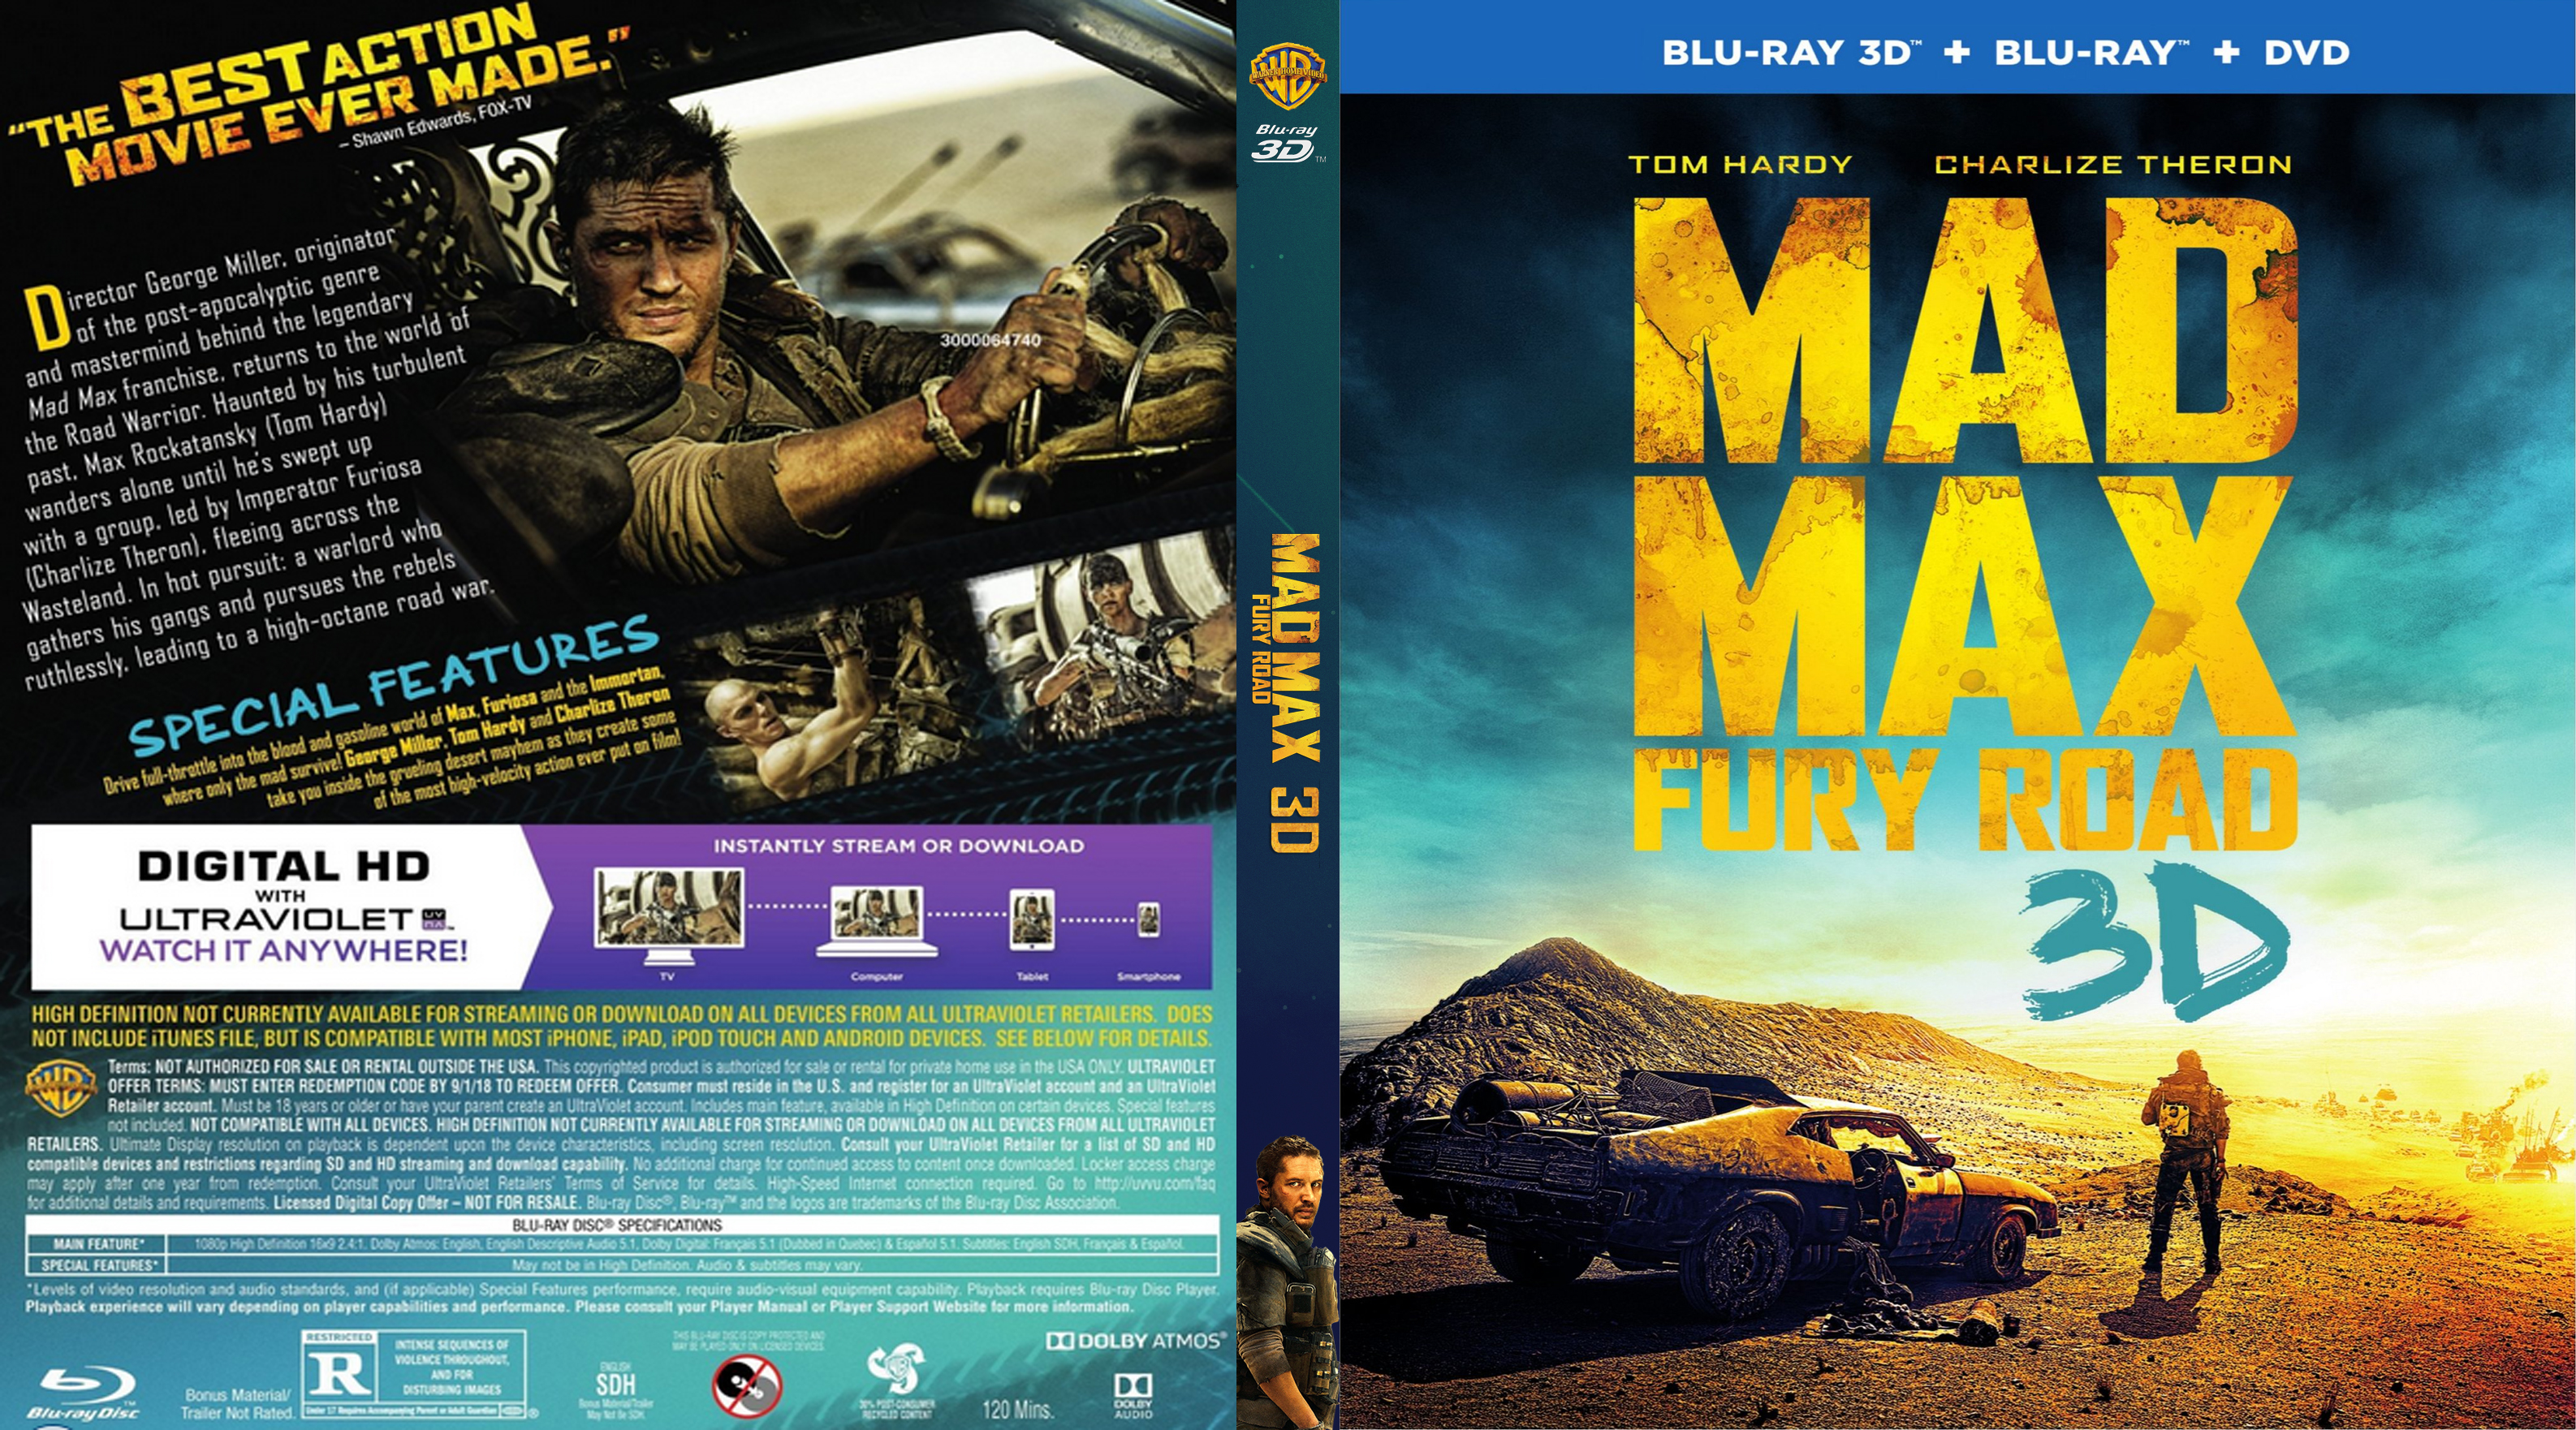 Jaquette DVD Mad Max Fury Road Zone 1 (BLU-RAY)